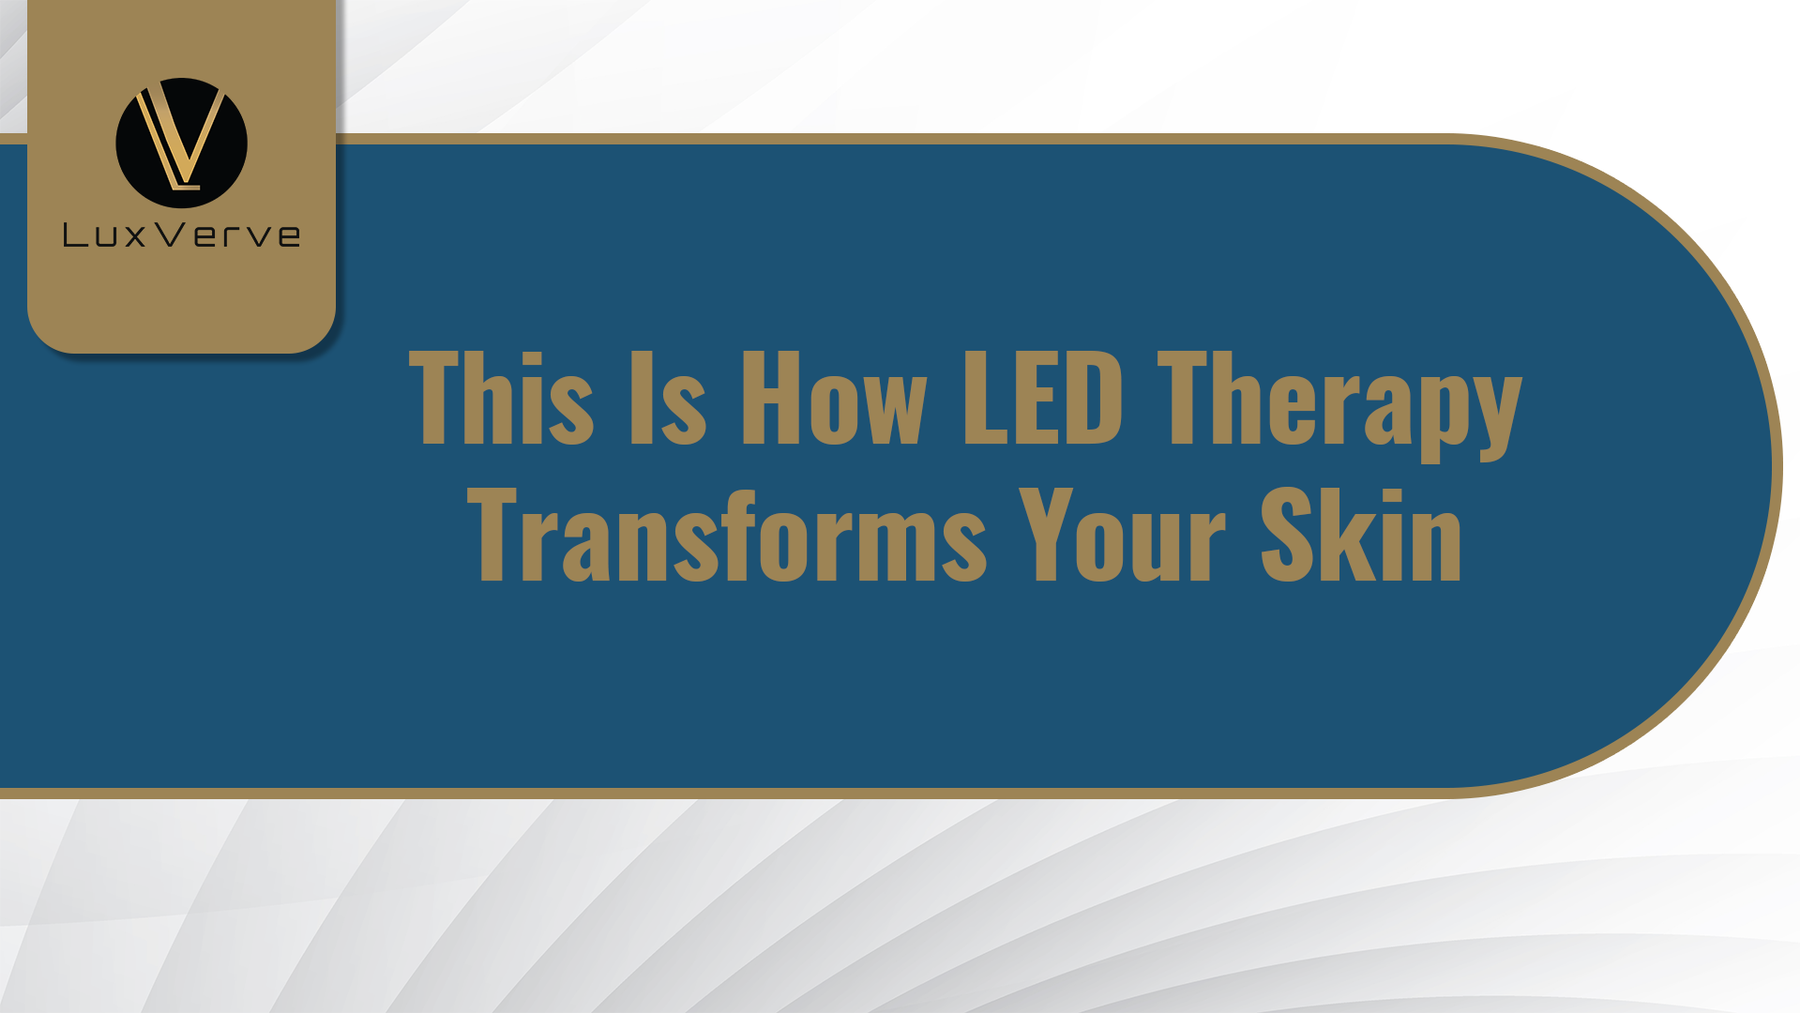 This Is How LED Therapy Transforms Your Skin - LuxVerve